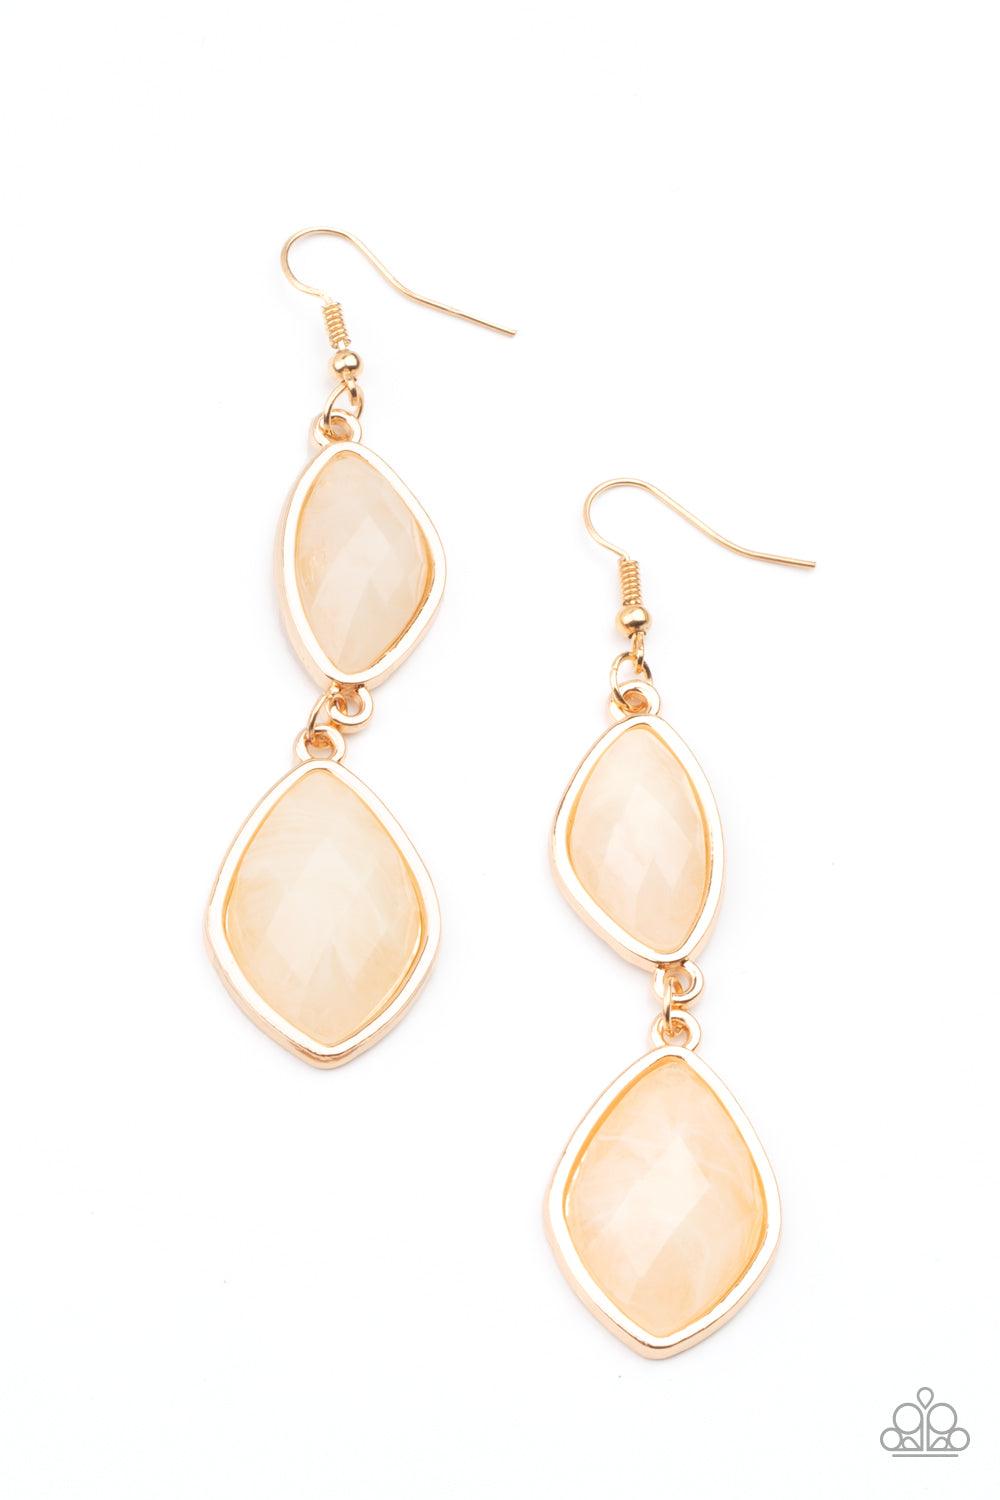 Paparazzi Accessories The Oracle Has Spoken - Gold Featuring shimmery faceted surfaces, cloudy faux stone beads are pressed into sleek gold frames that link into a whimsically refined lure. Earring attaches to a standard fishhook fitting. Sold as one pair